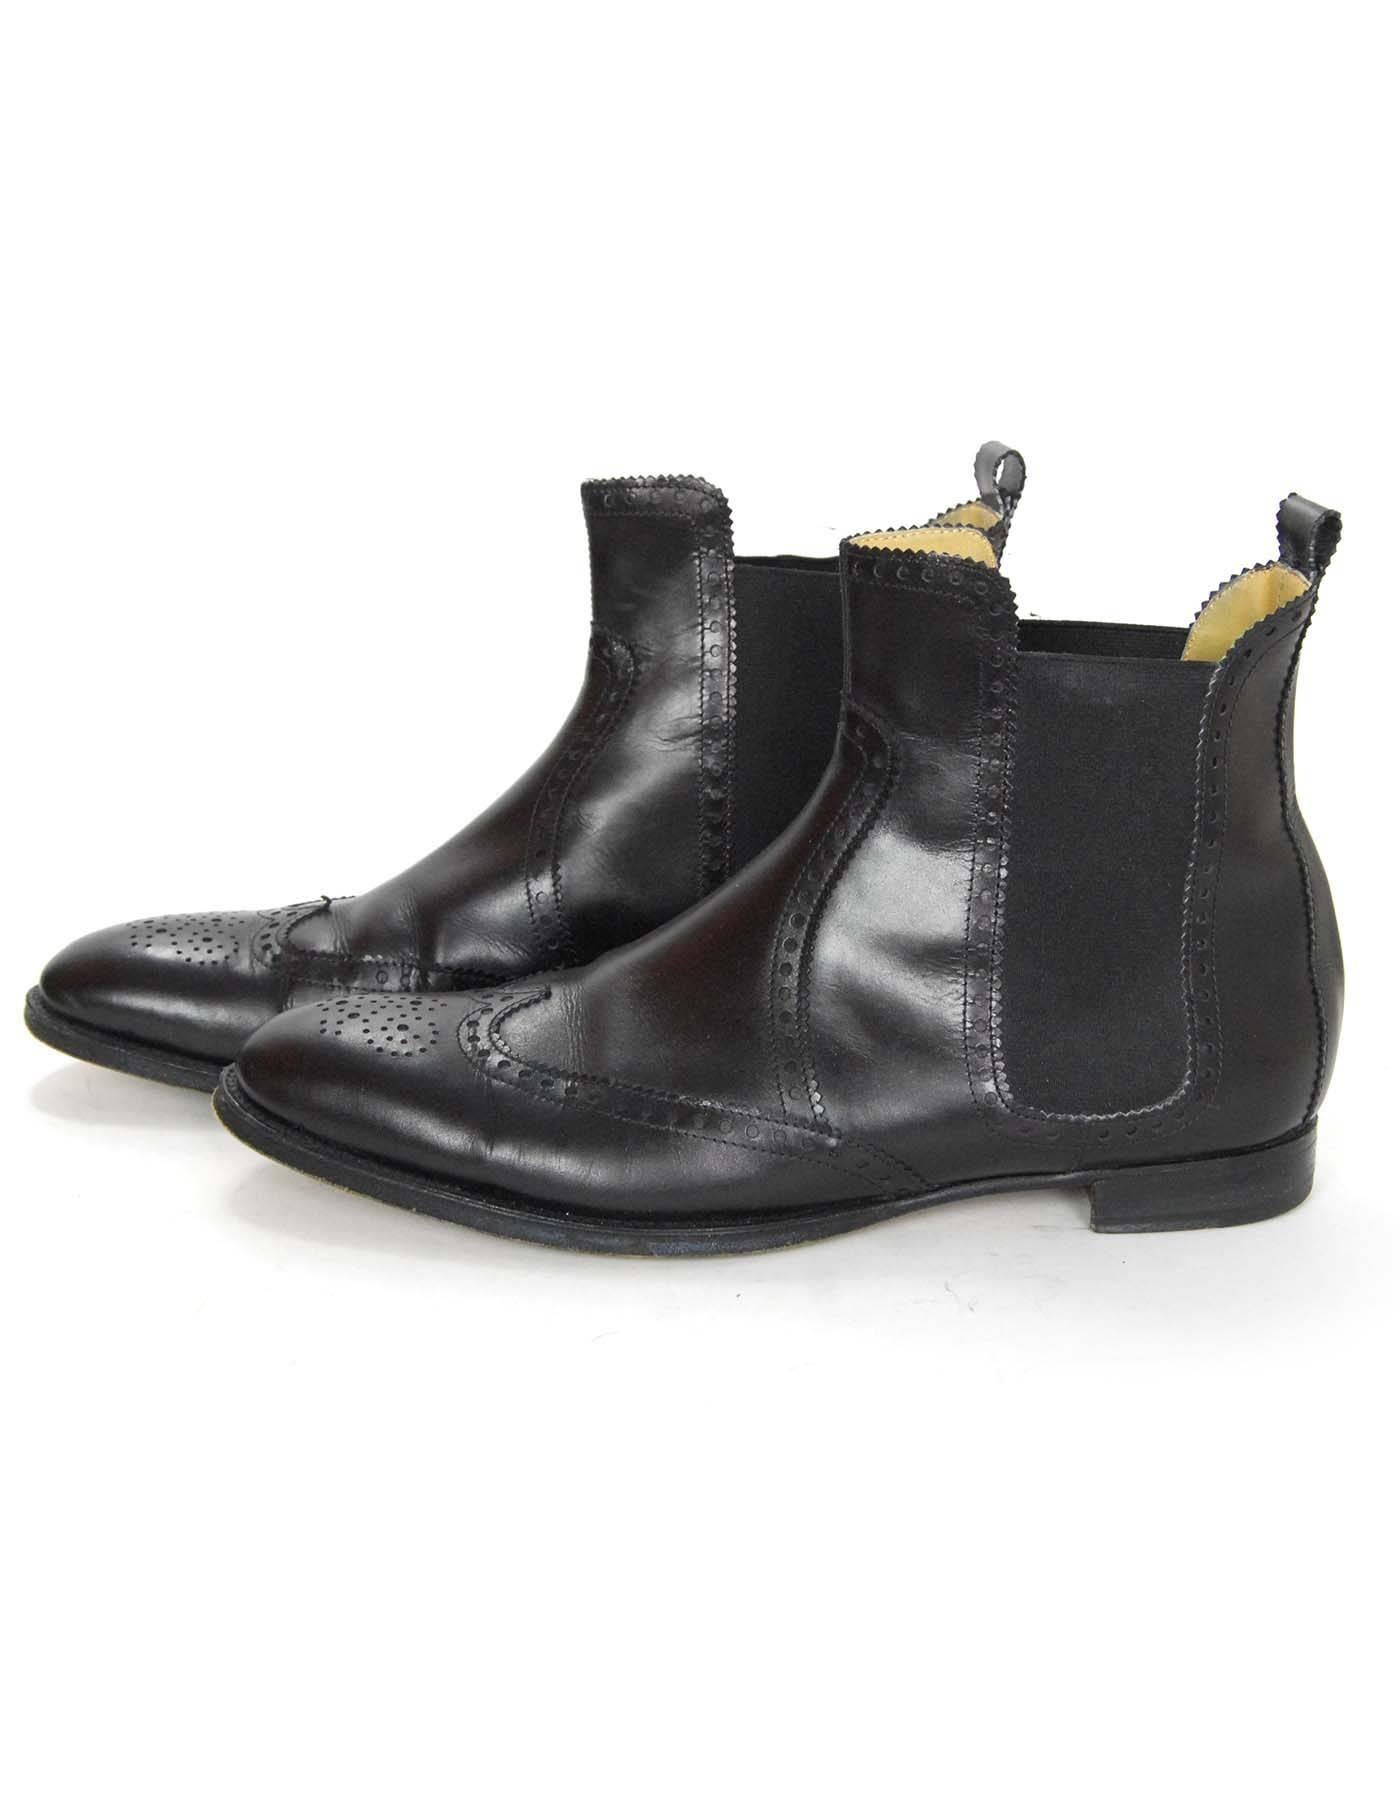 Hermes Black Leather Spectator Brighton Ankle Boots Sz 41

Made In: Italy
Color: Black 
Hardware: None
Retail Price: $1,225 + tax
Materials: Leather
Sole Stamp: Hermes 41 semelle cmir Made in Italy
Overall Condition: Very good pre-owned